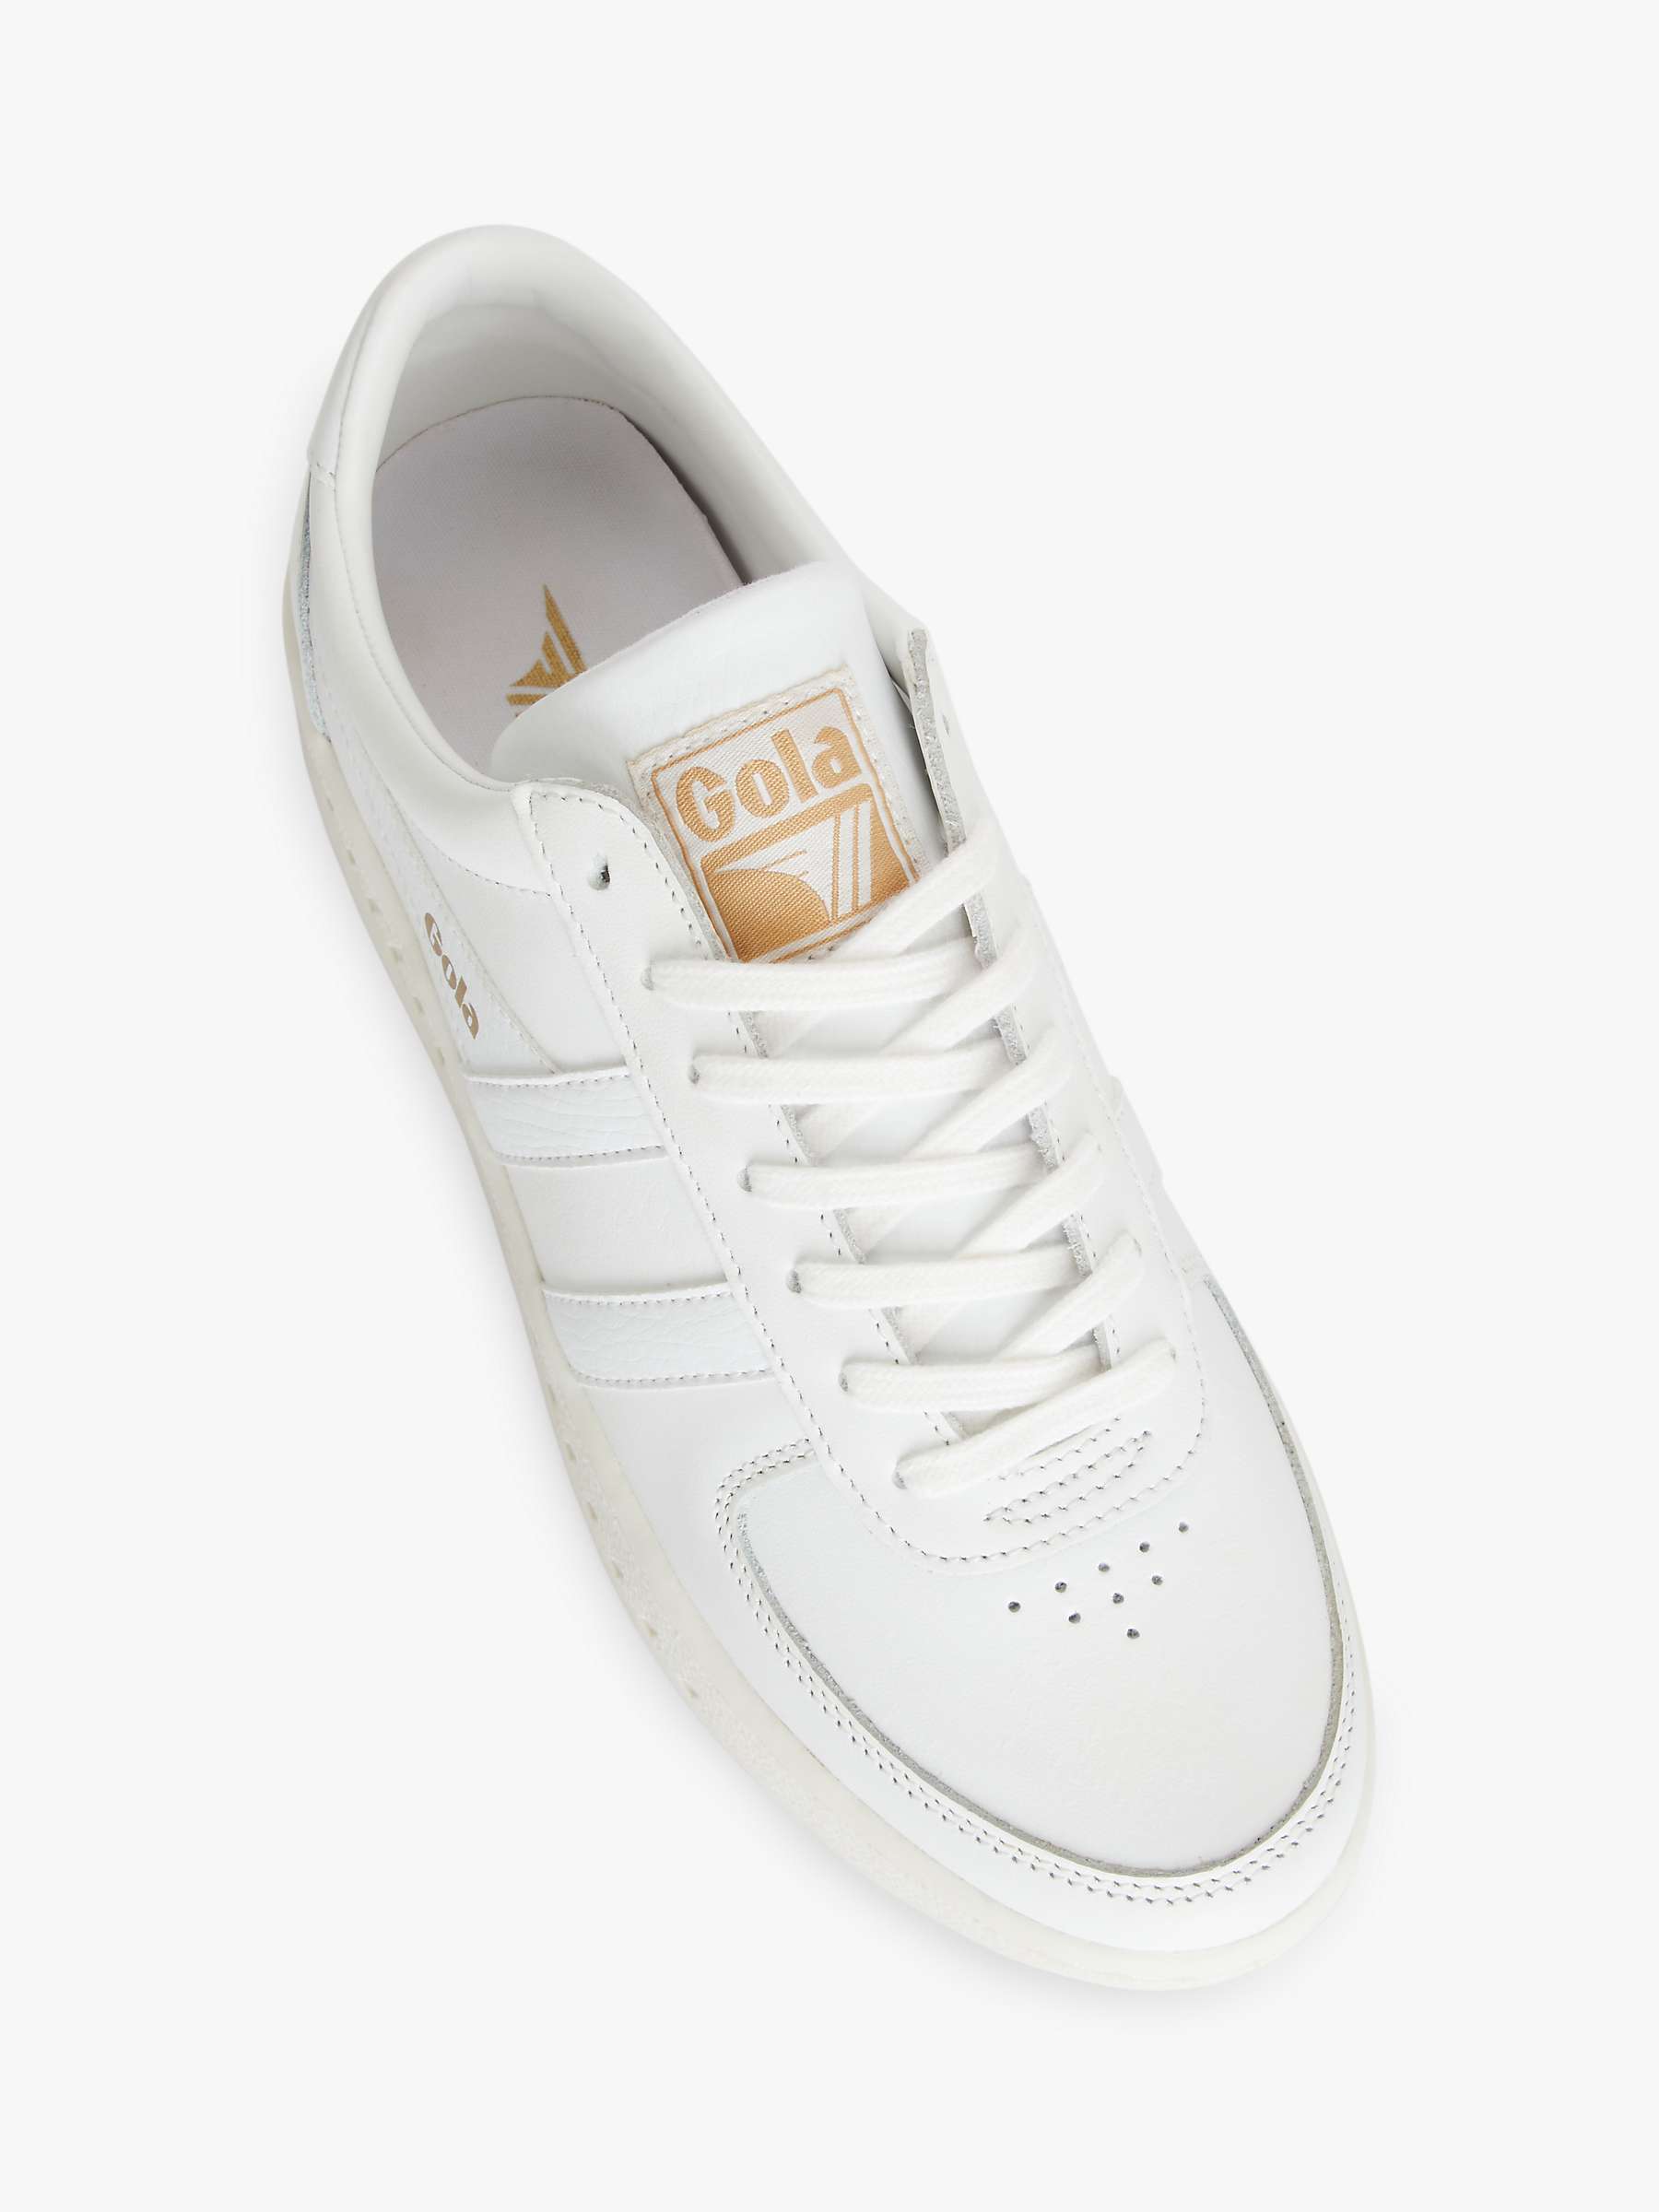 Gola Grandslam Trident Leather Trainers, White at John Lewis & Partners